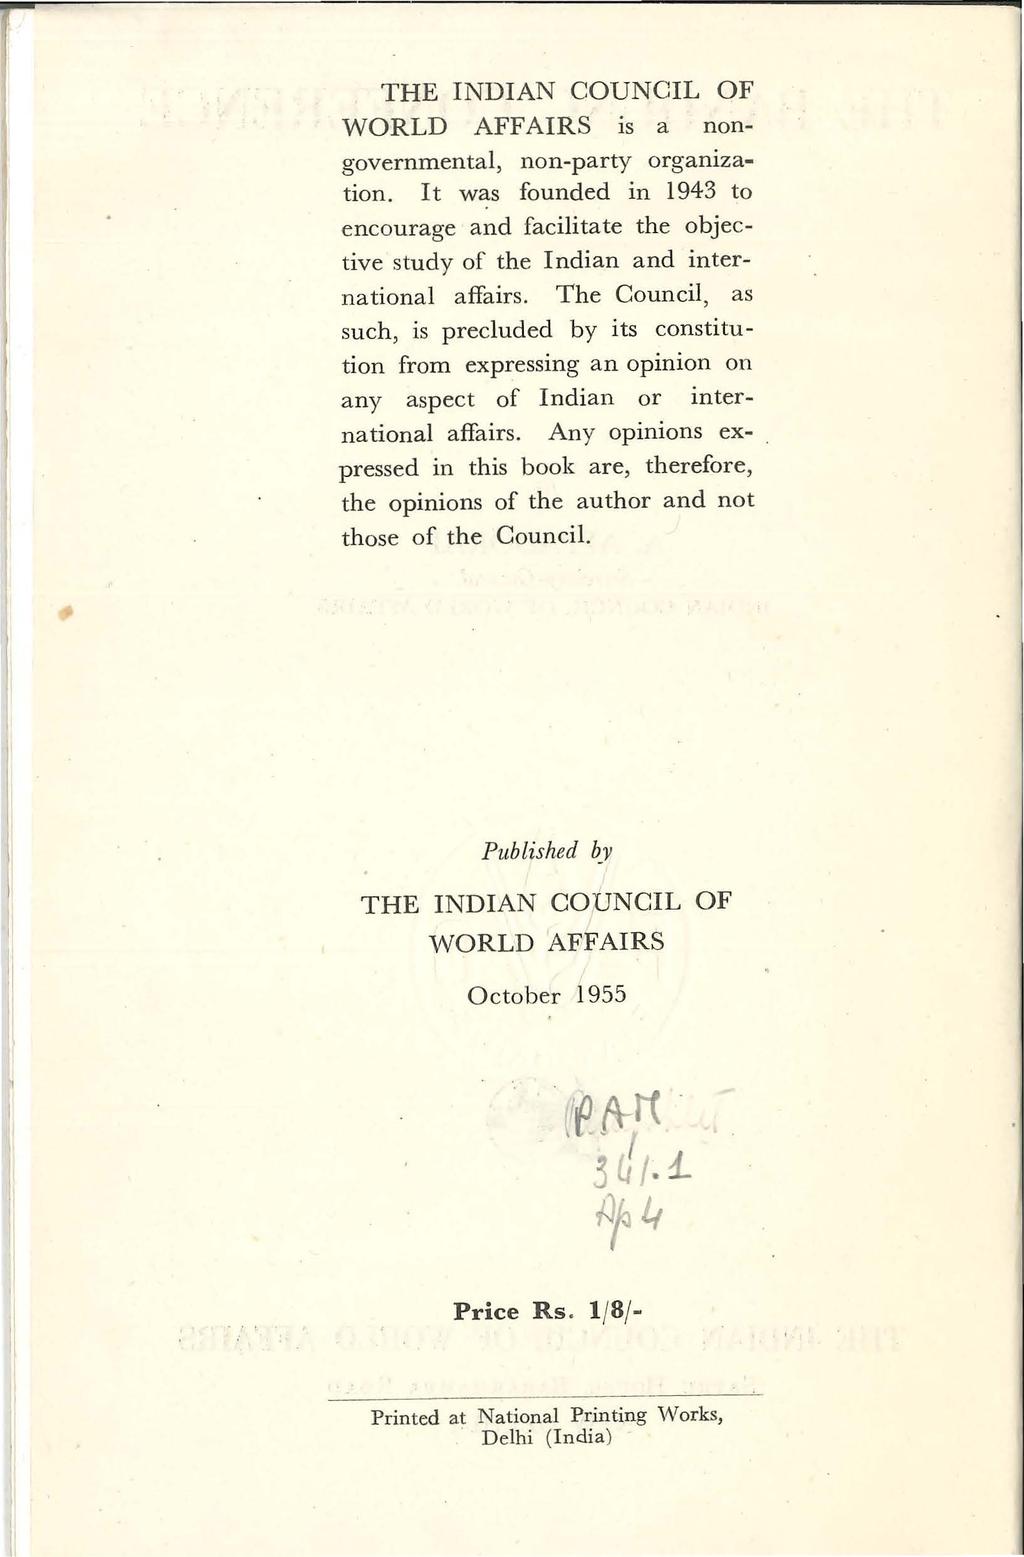 THE INDIAN COUNCIL OF WORLD AFFAIRS 1s a nongovernmental, non-party organization. It was founded in 1943 to encourage and facilitate the objective study of the Indian and international affairs.